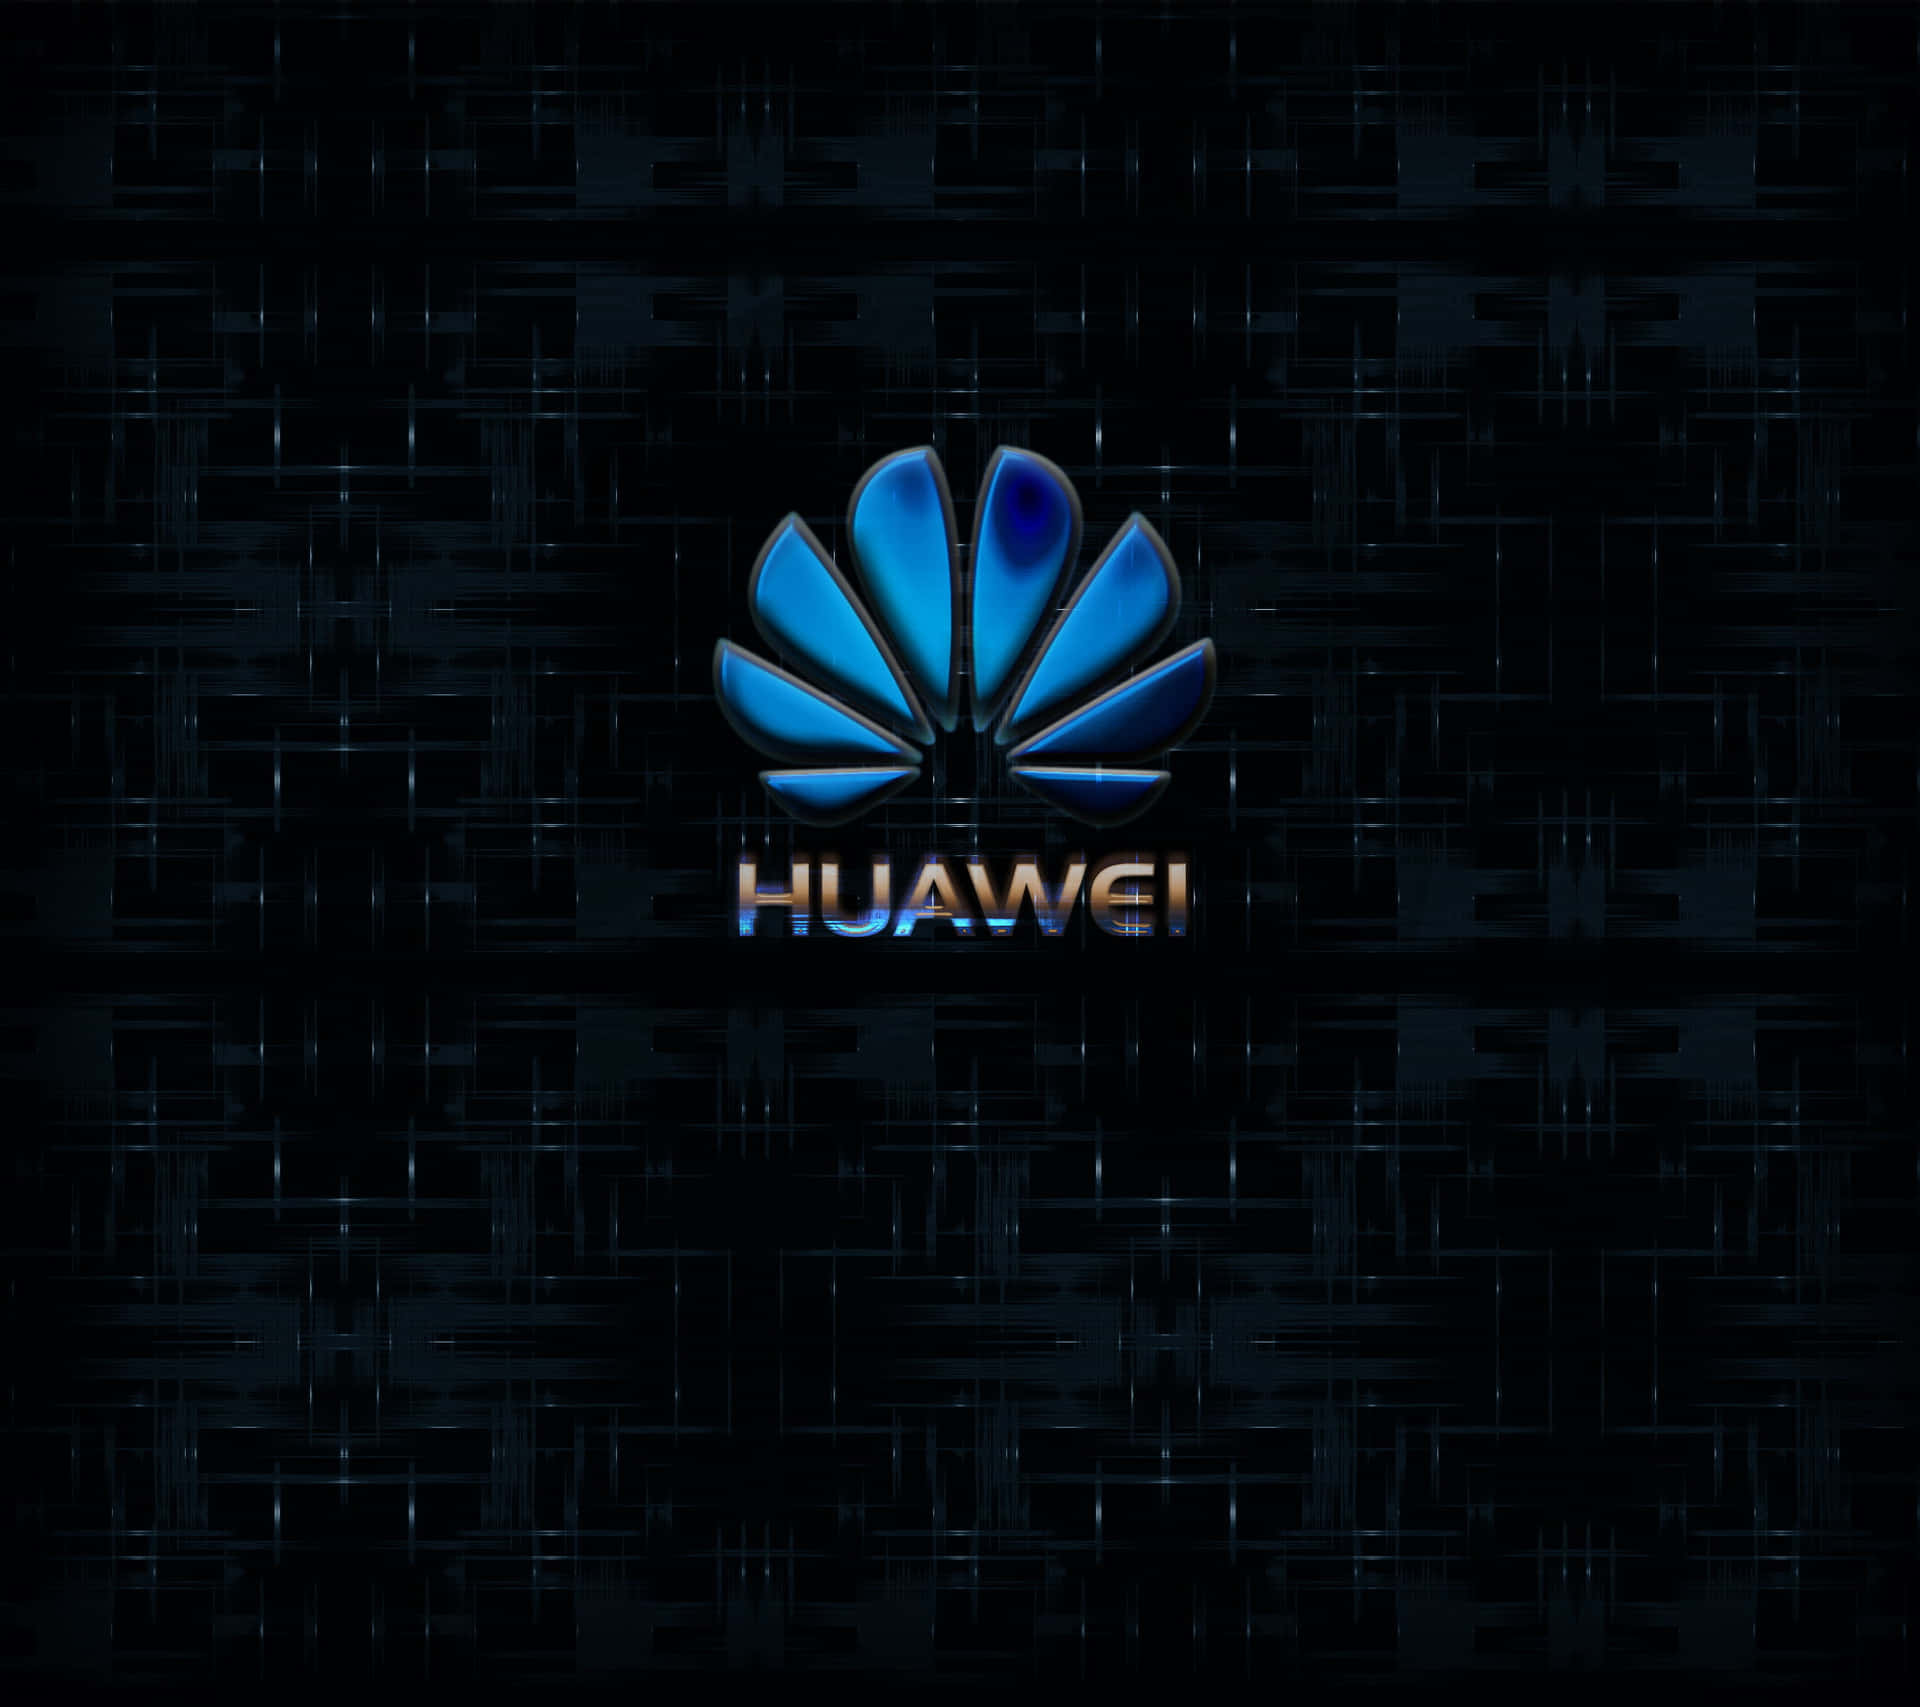 Stay connected with Huawei